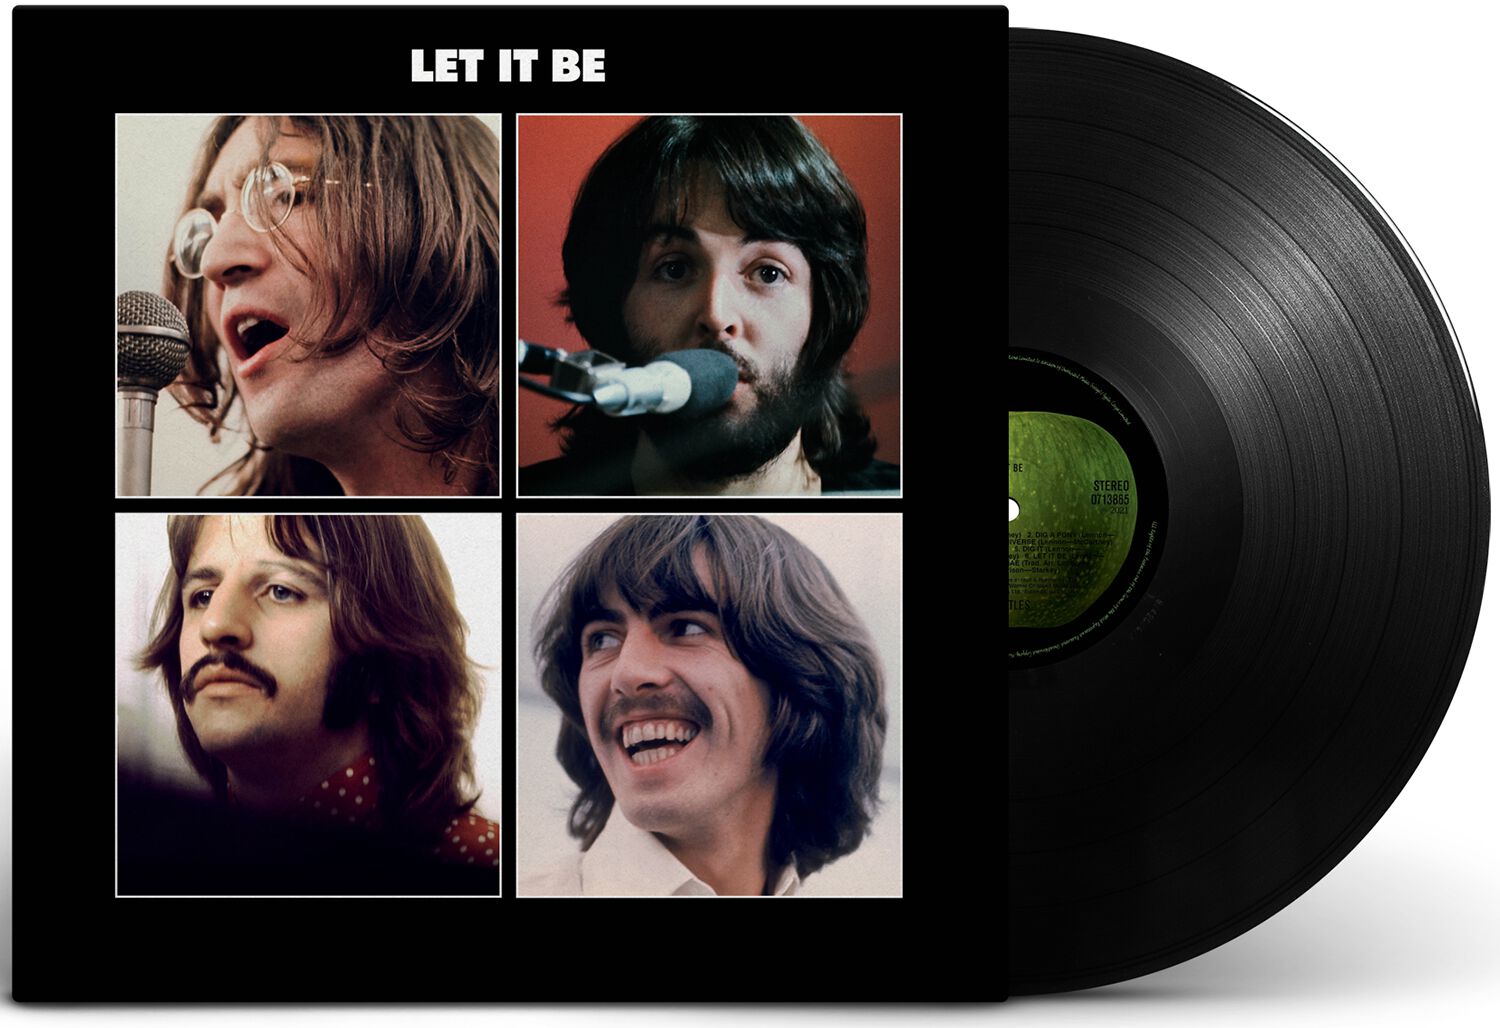 The Beatles Let It Be - 50th Anniversary LP multicolor